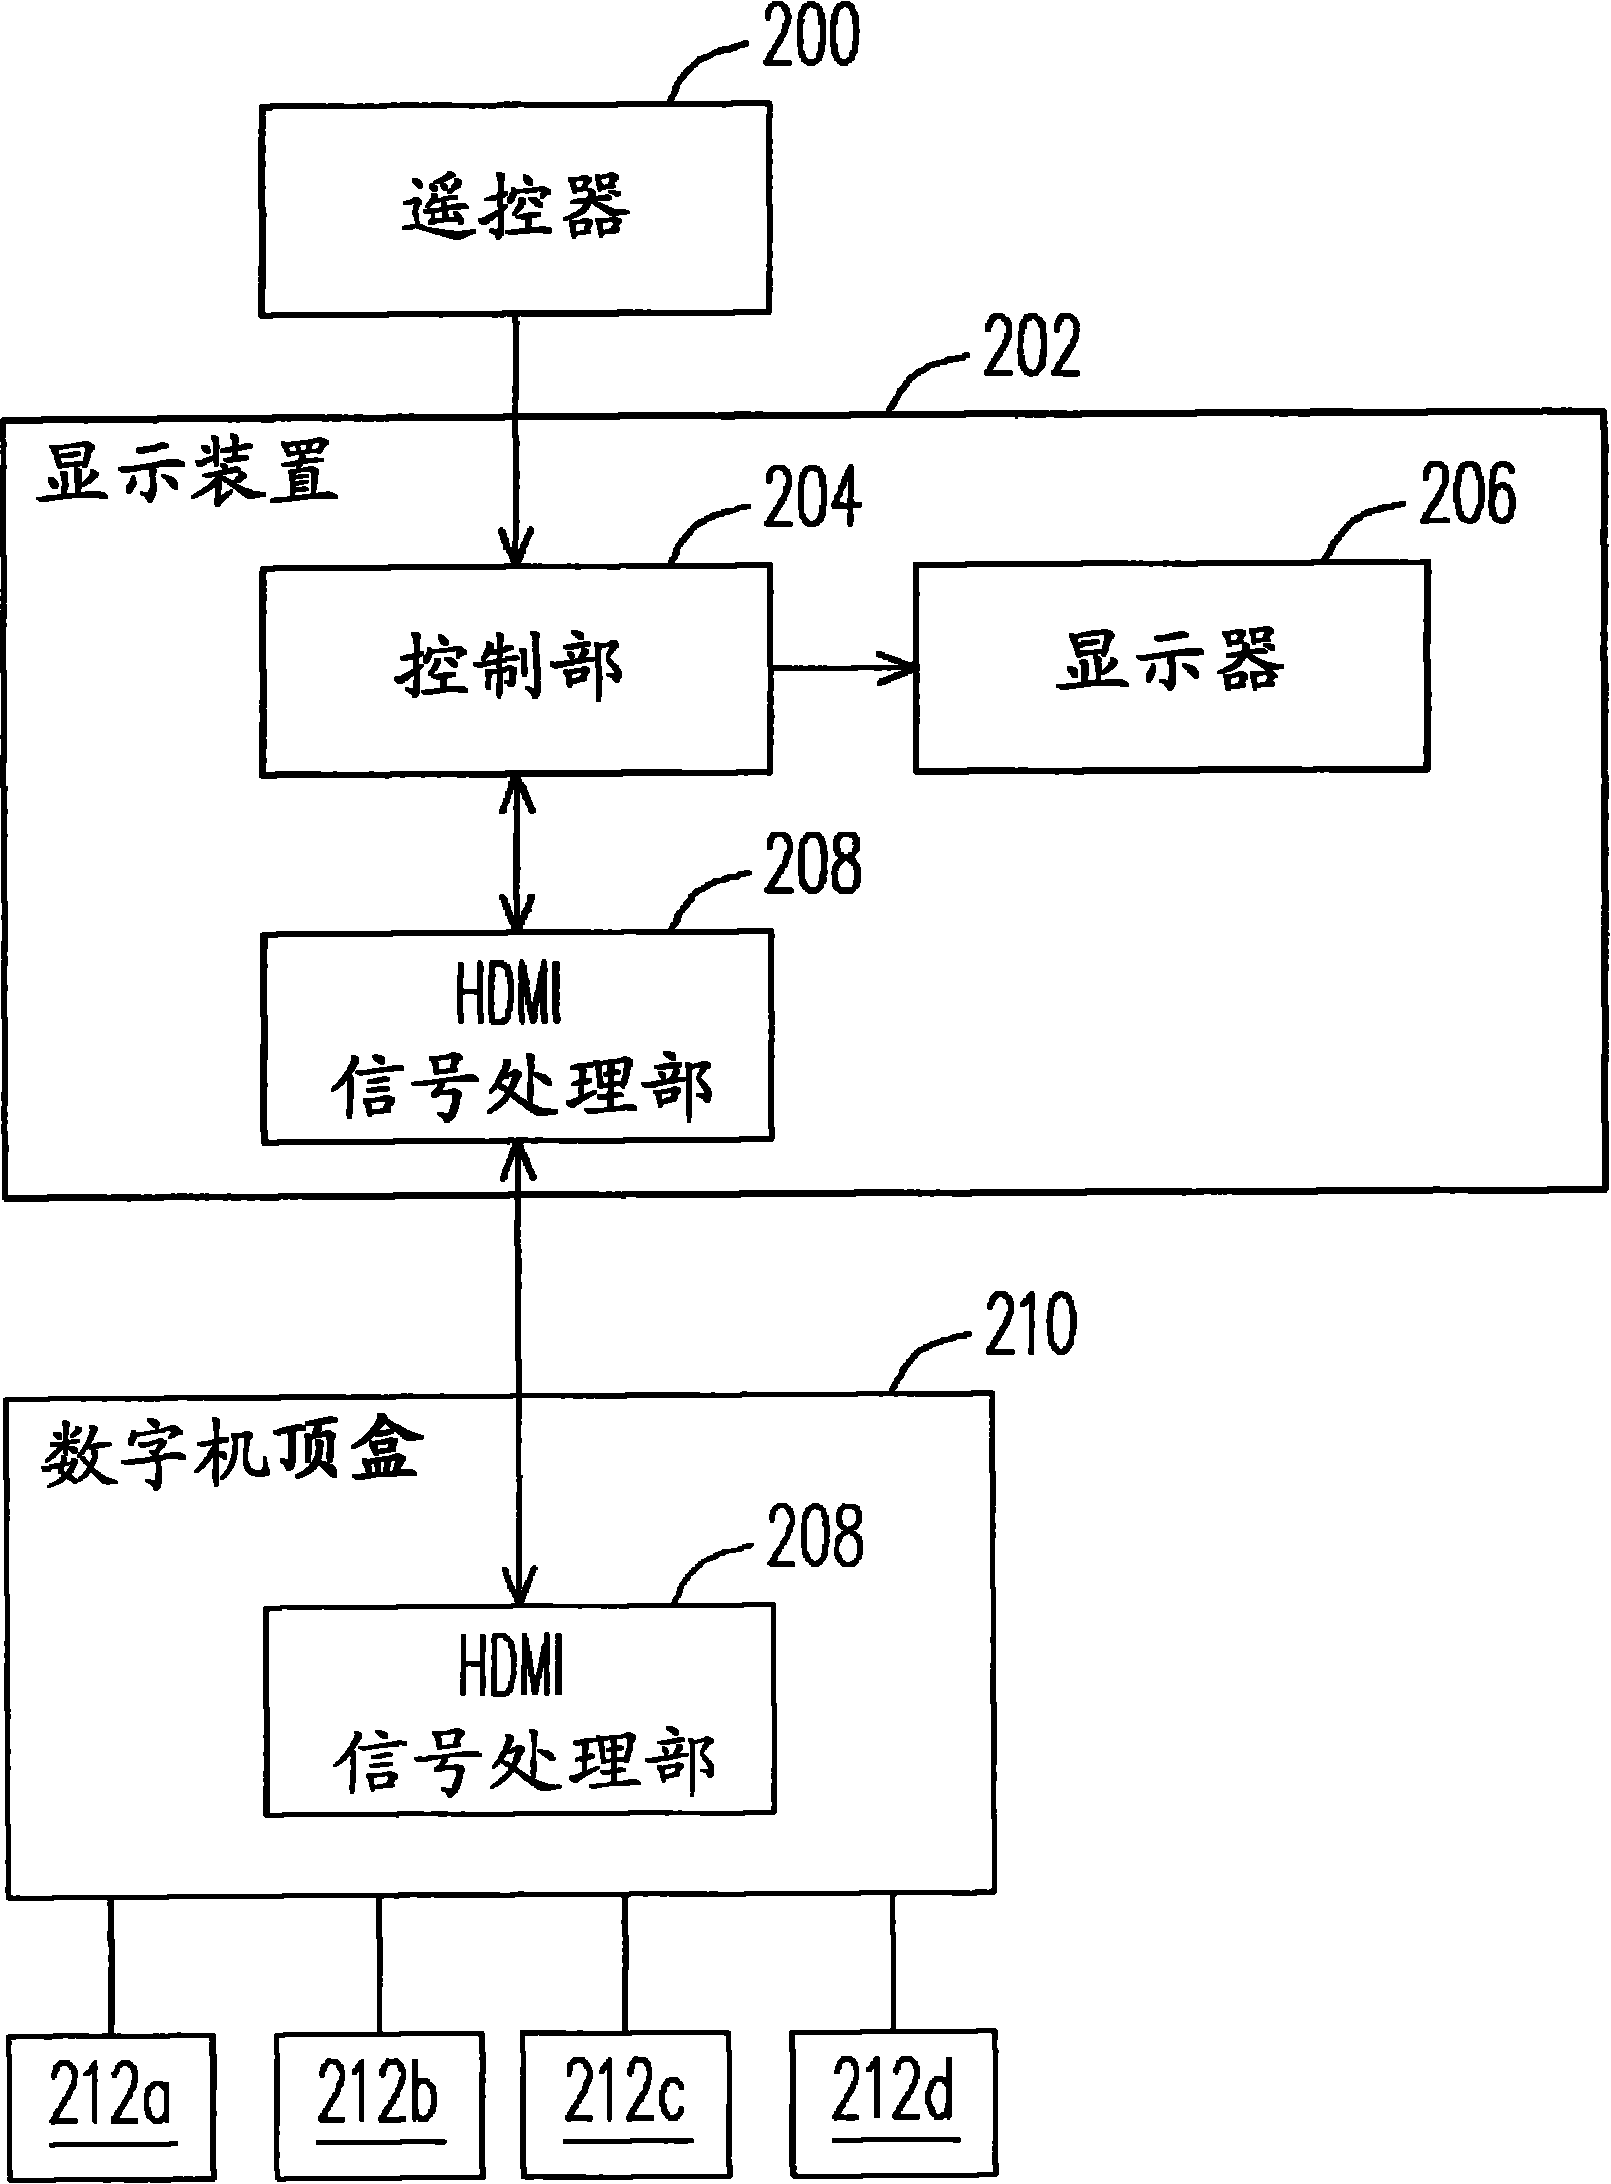 High-definition multimedia interface (HDMI)-consumer electronics control (CEC) function prompting control method and display device